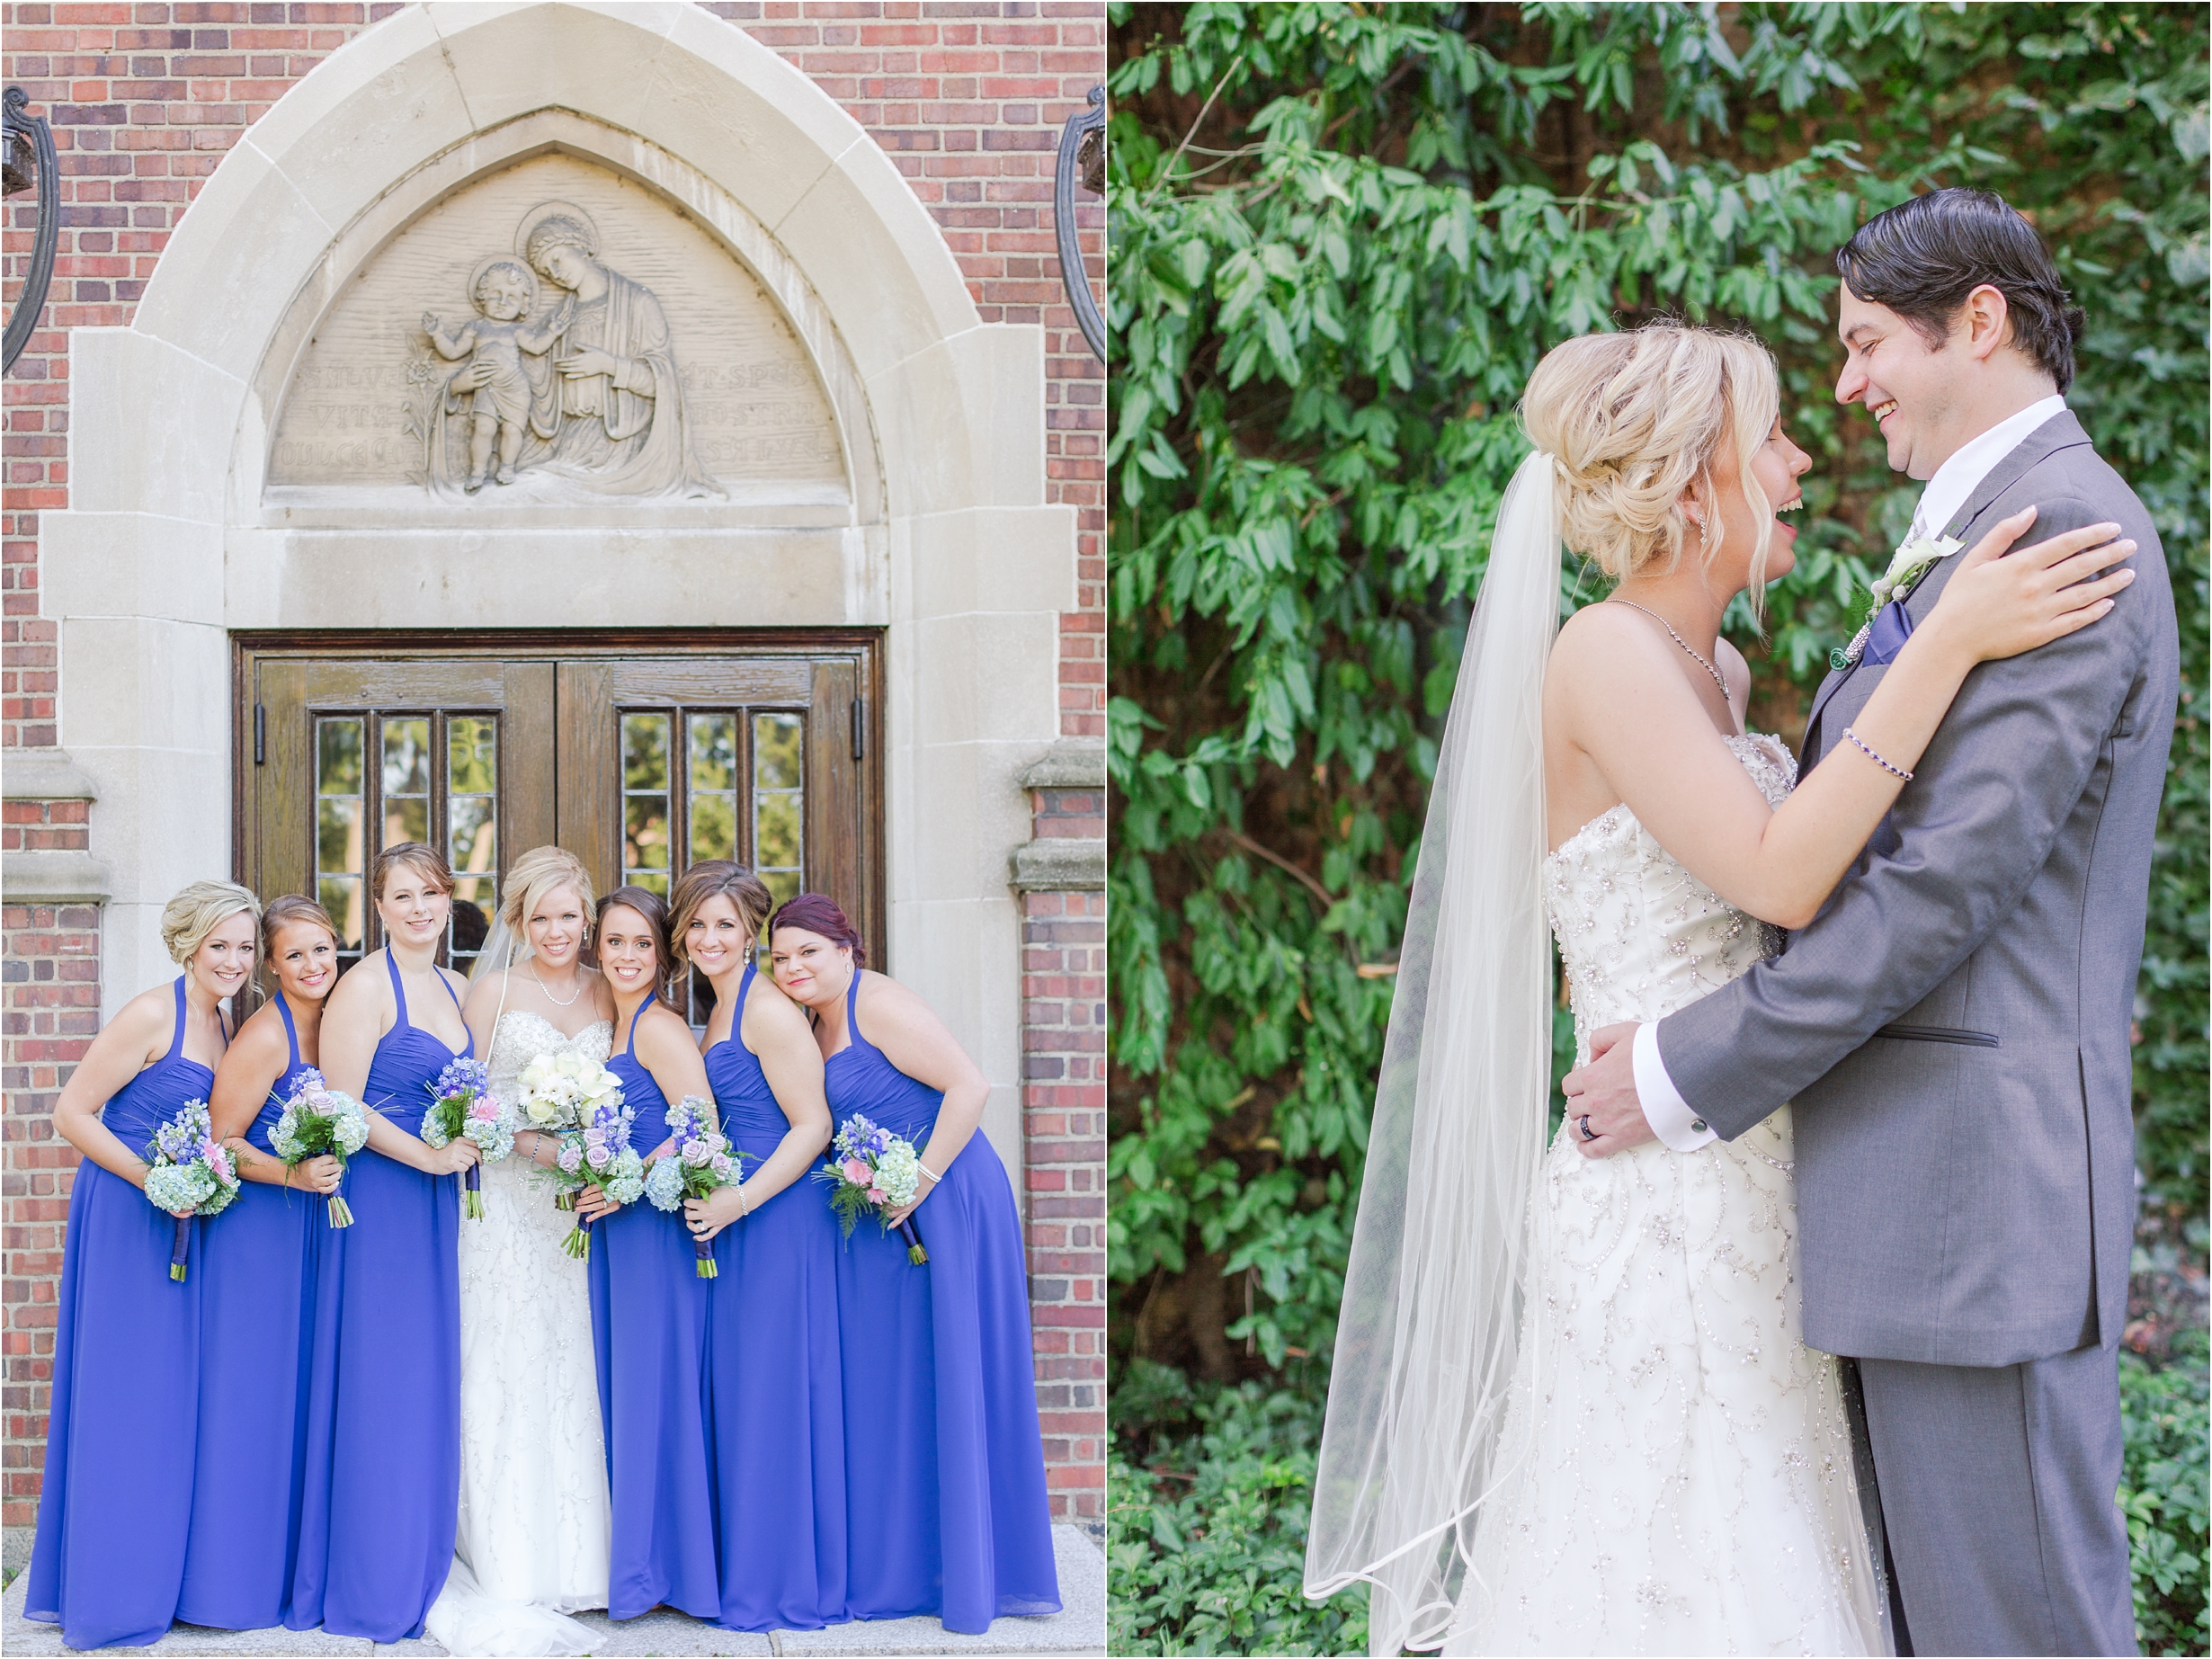 romantic-timeless-candid-wedding-photos-at-grosse-pointe-academy-in-grosse-pointe-mi-by-courtney-carolyn-photography_0012.jpg